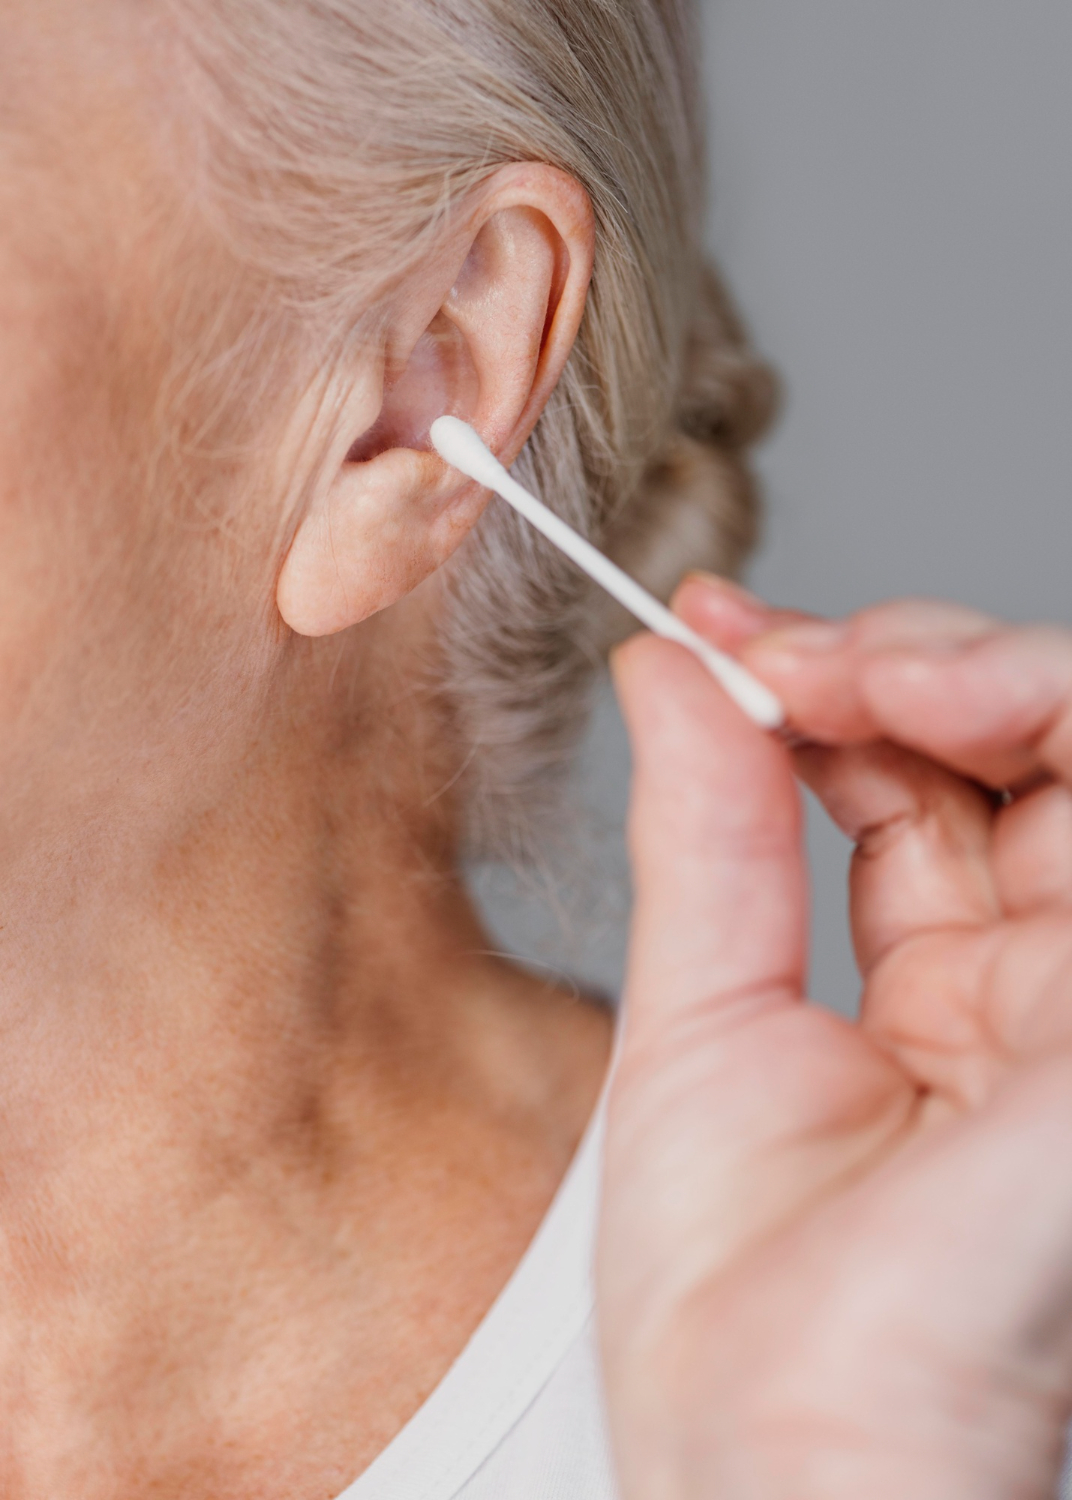 Boots Ear Wax Removal Edgware The Ultimate Guide to Clearing Your Ears Safely and Effectively